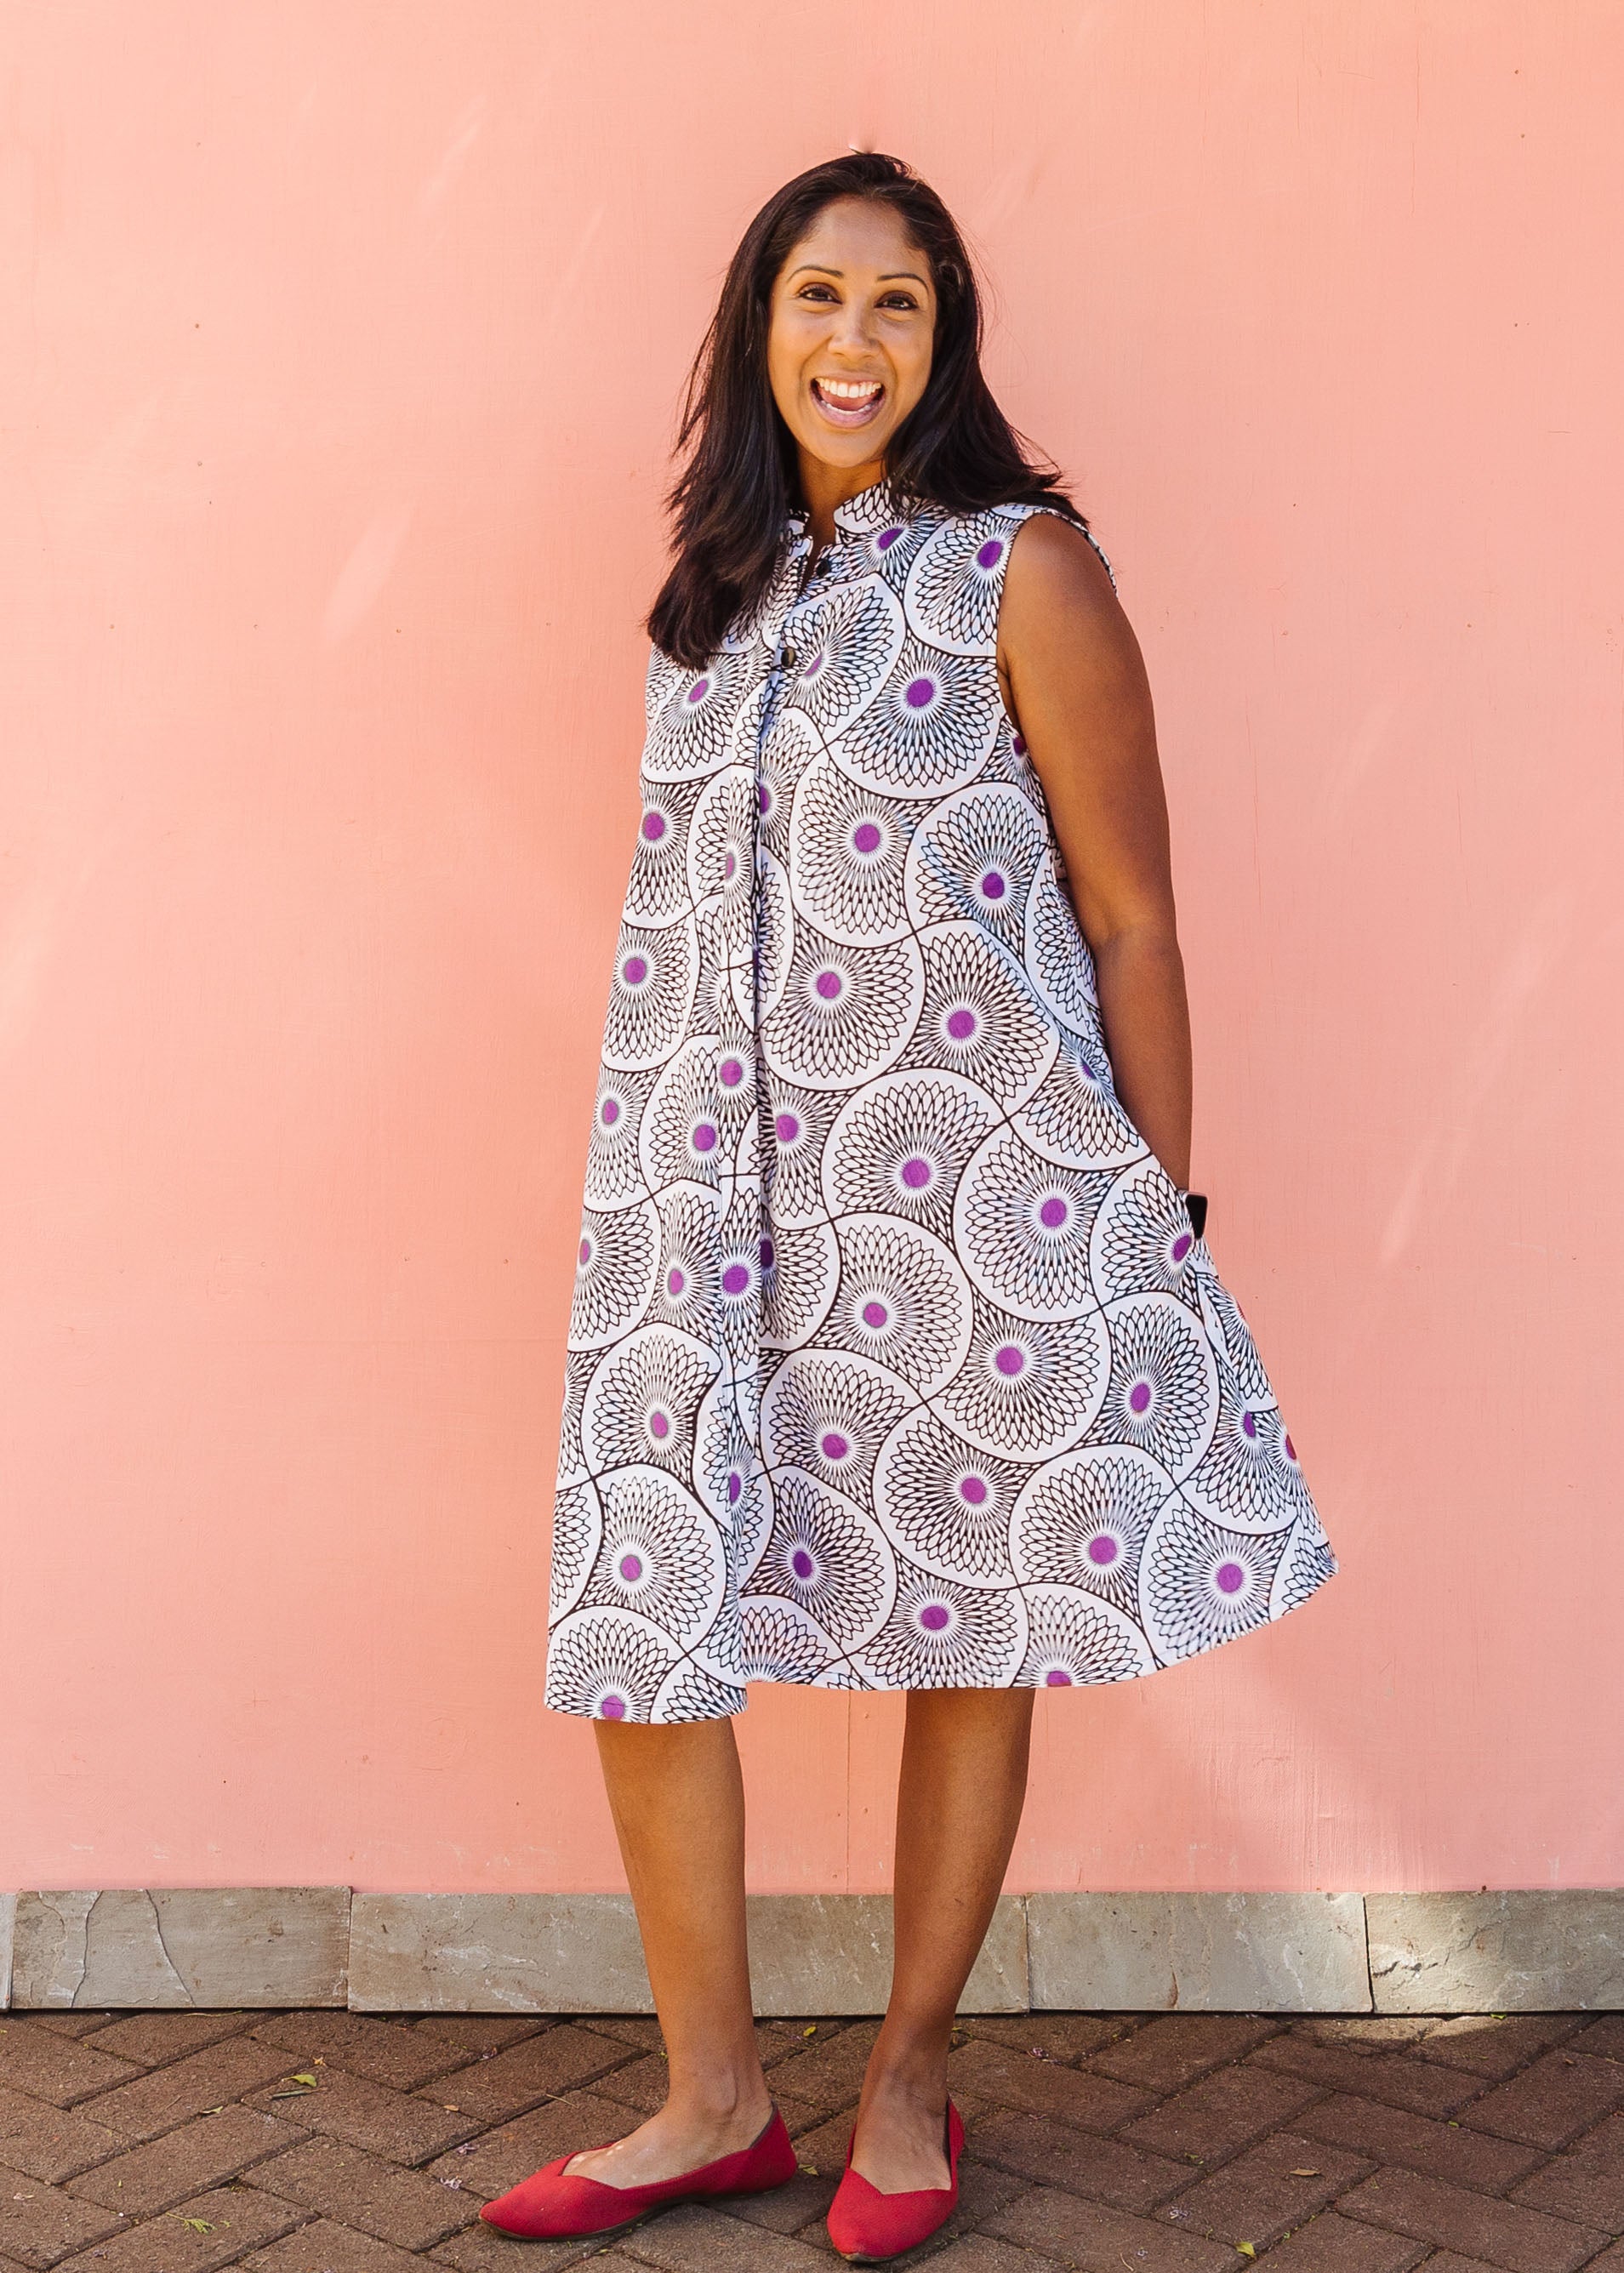 Model wearing white sleeveless dress with large black and purple floral print.